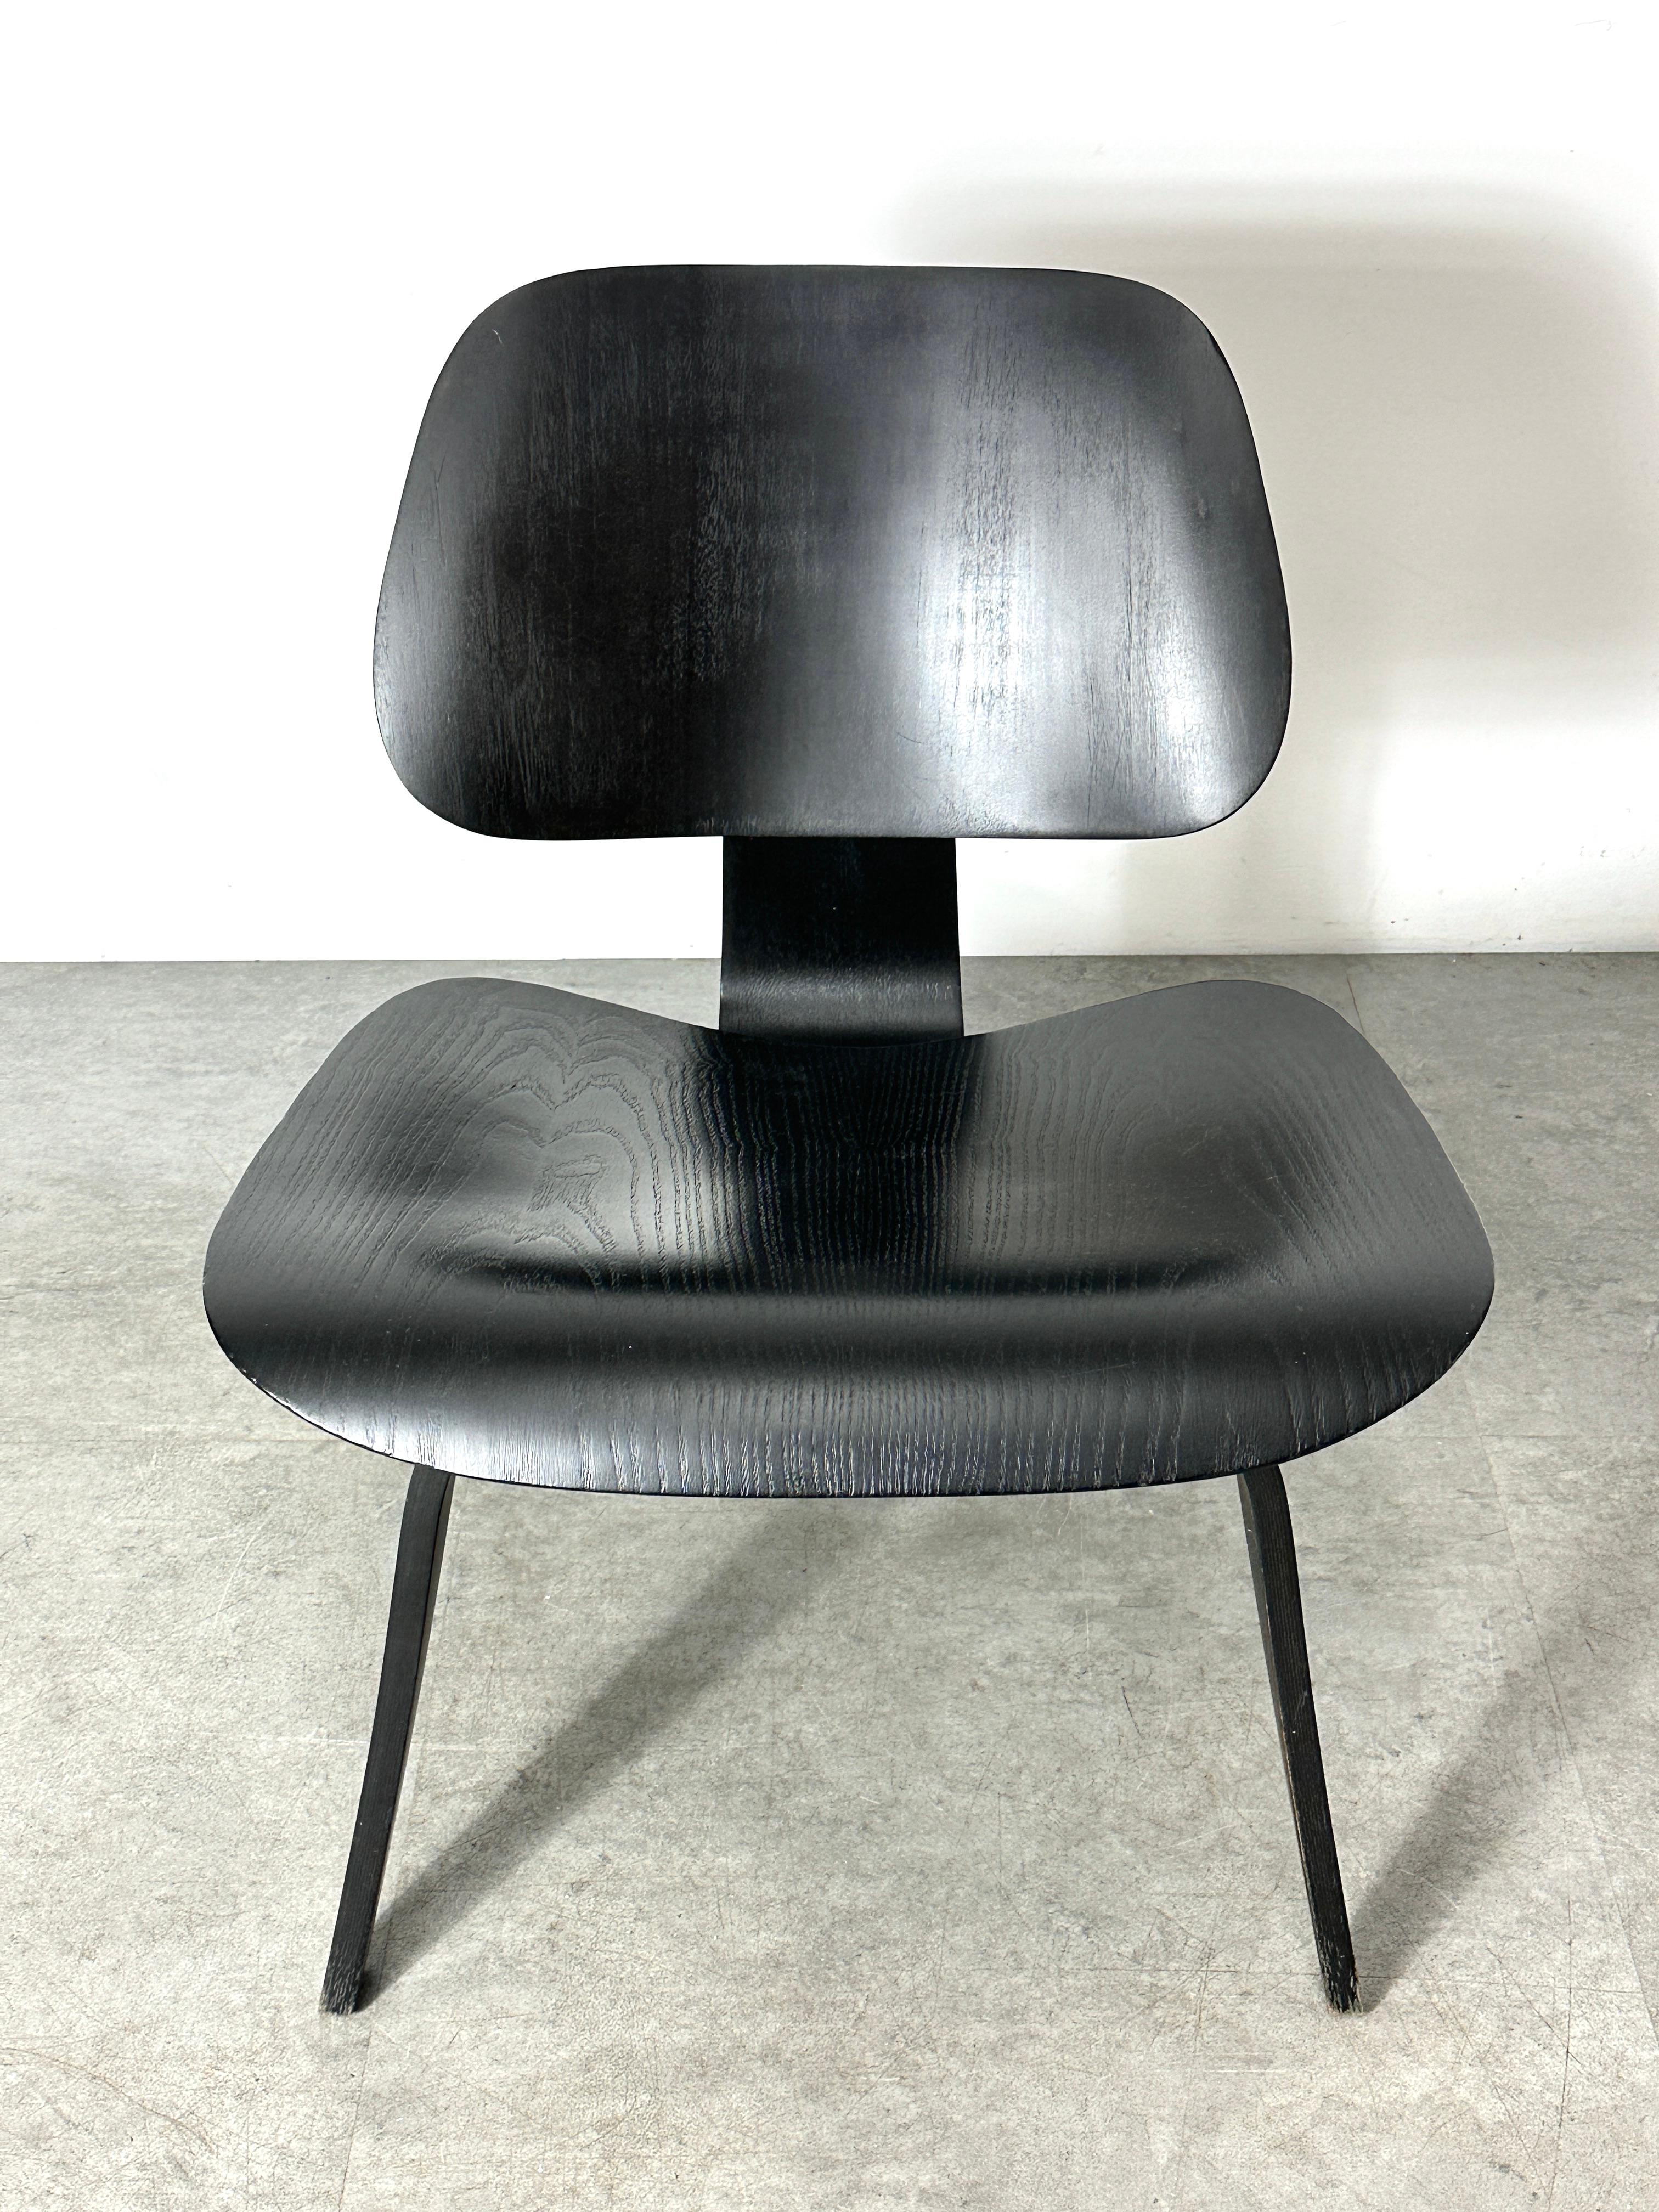 American Vintage 1st Generation Black LCW Lounge Chair by Charles Eames for Evans 1940s For Sale